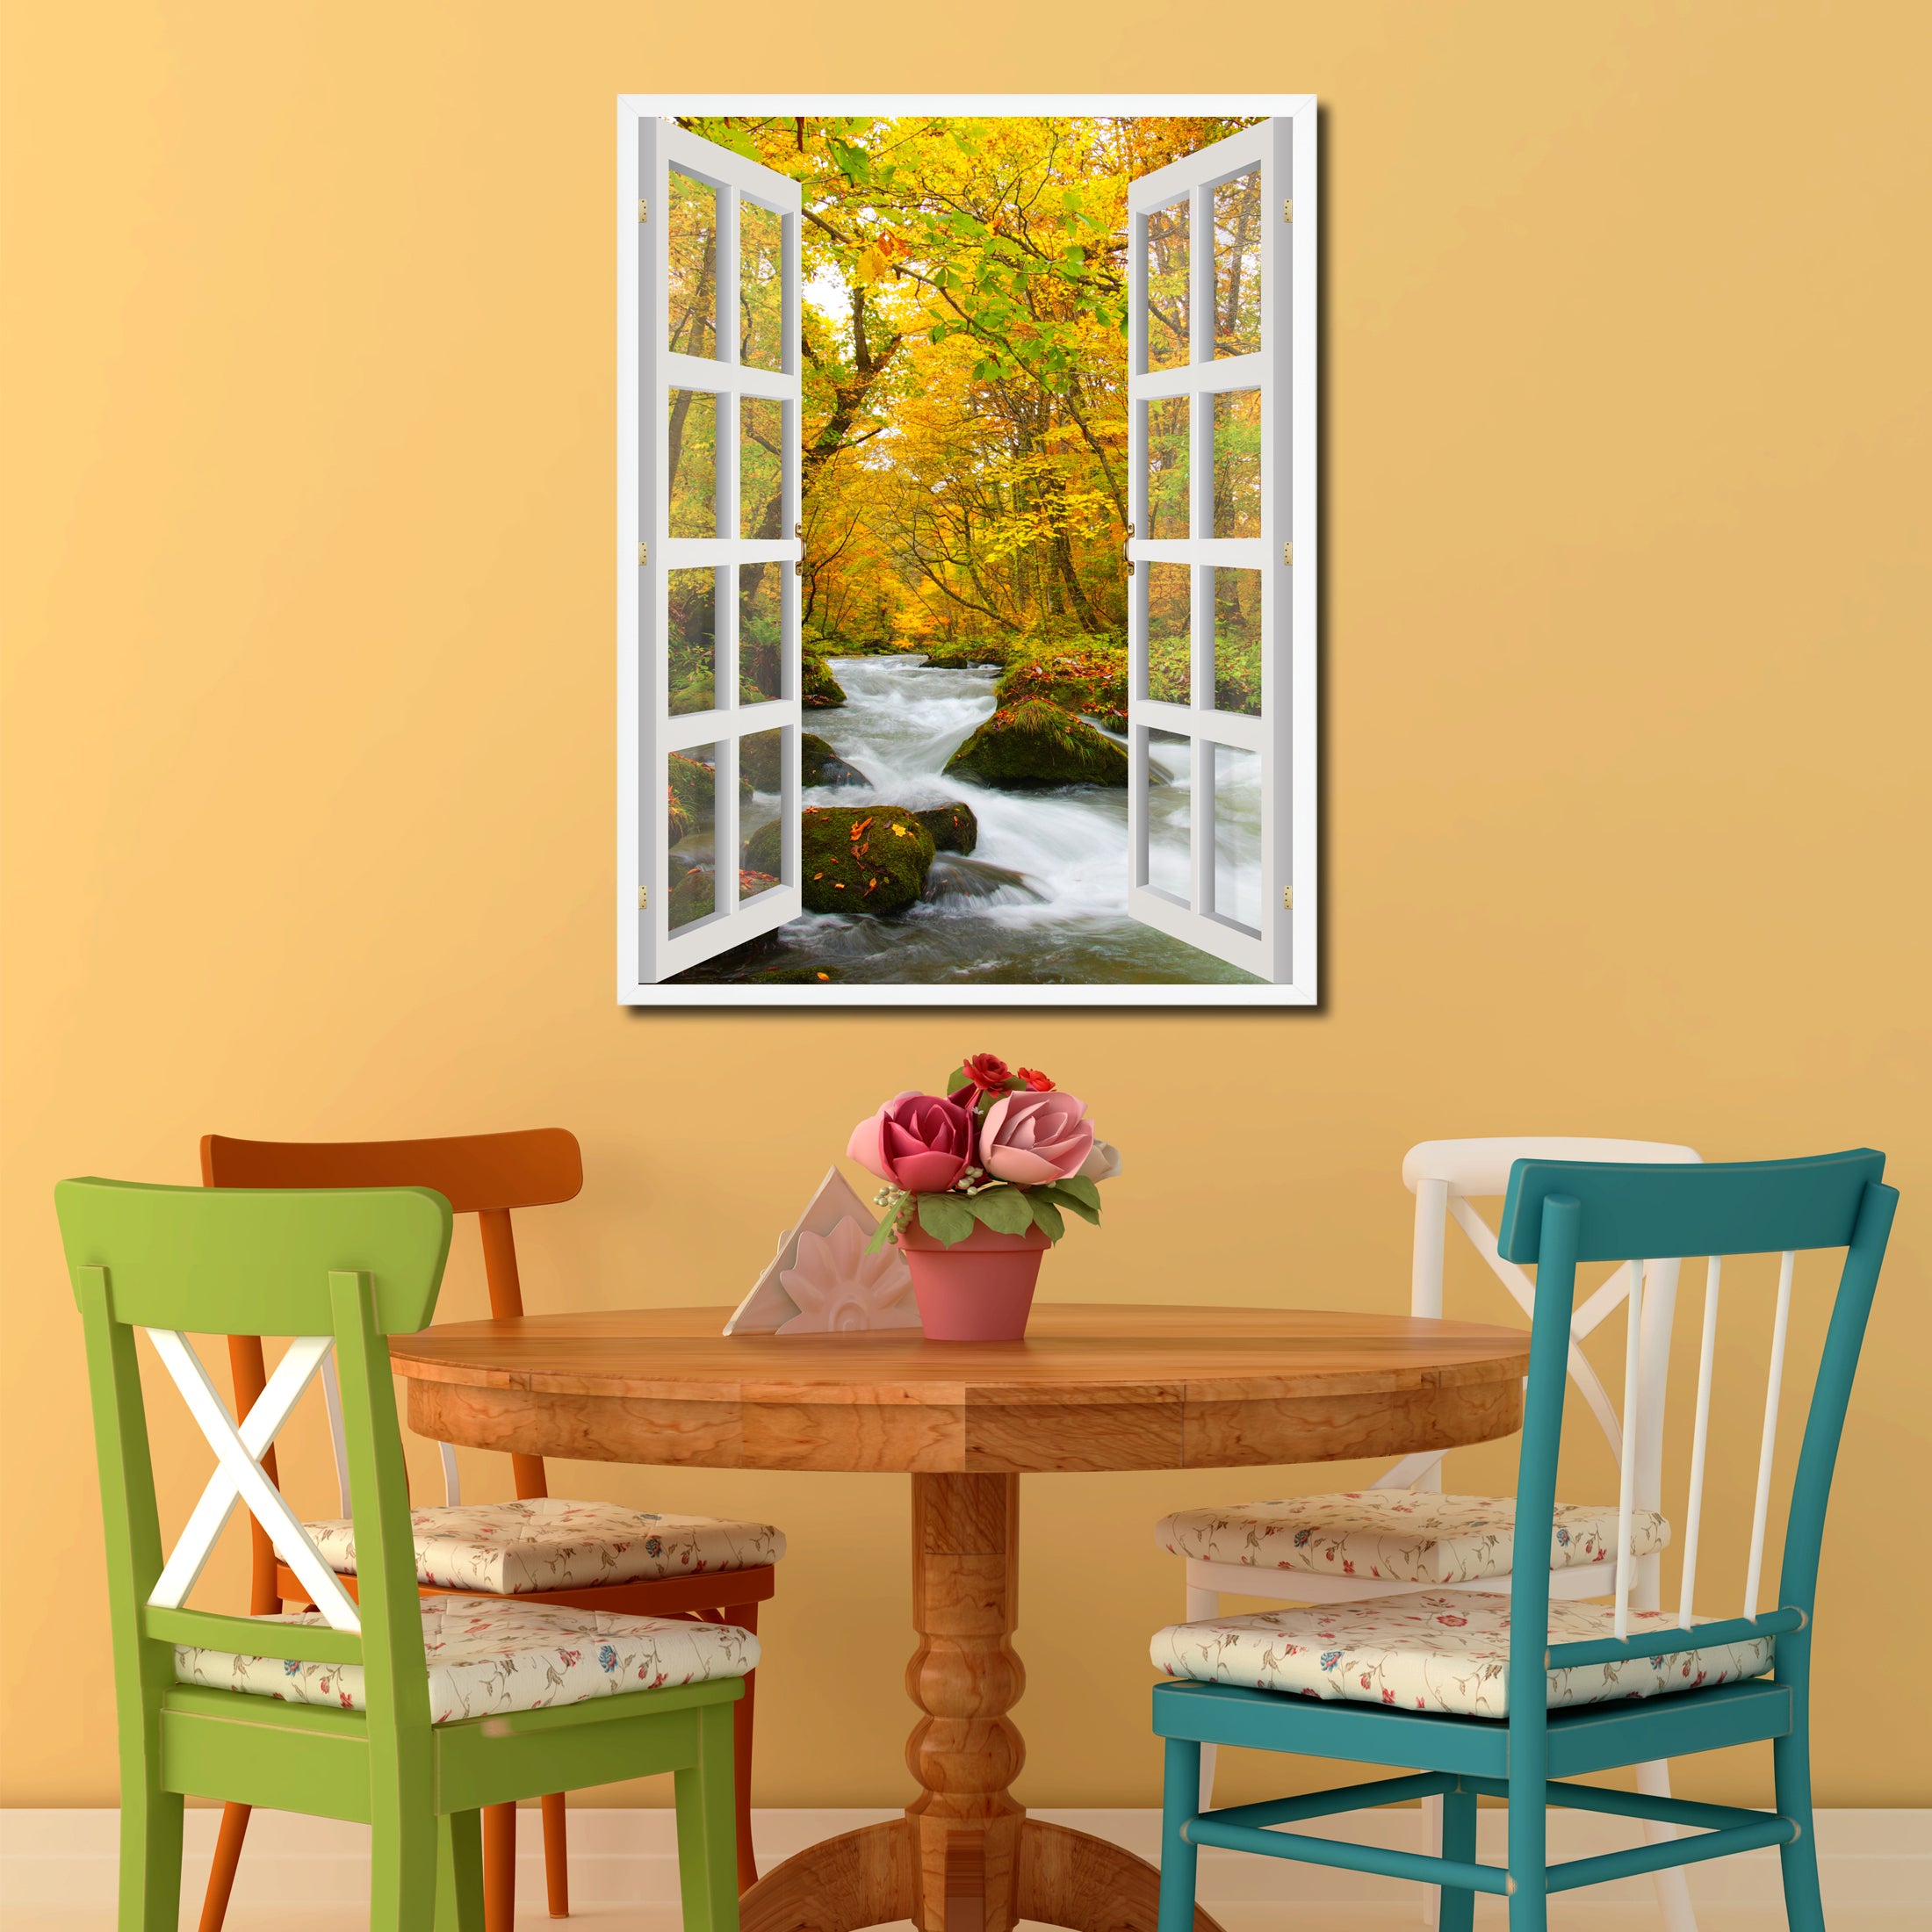 Autumn River Picture French Window Canvas Print with Frame Gifts Home Decor Wall Art Collection